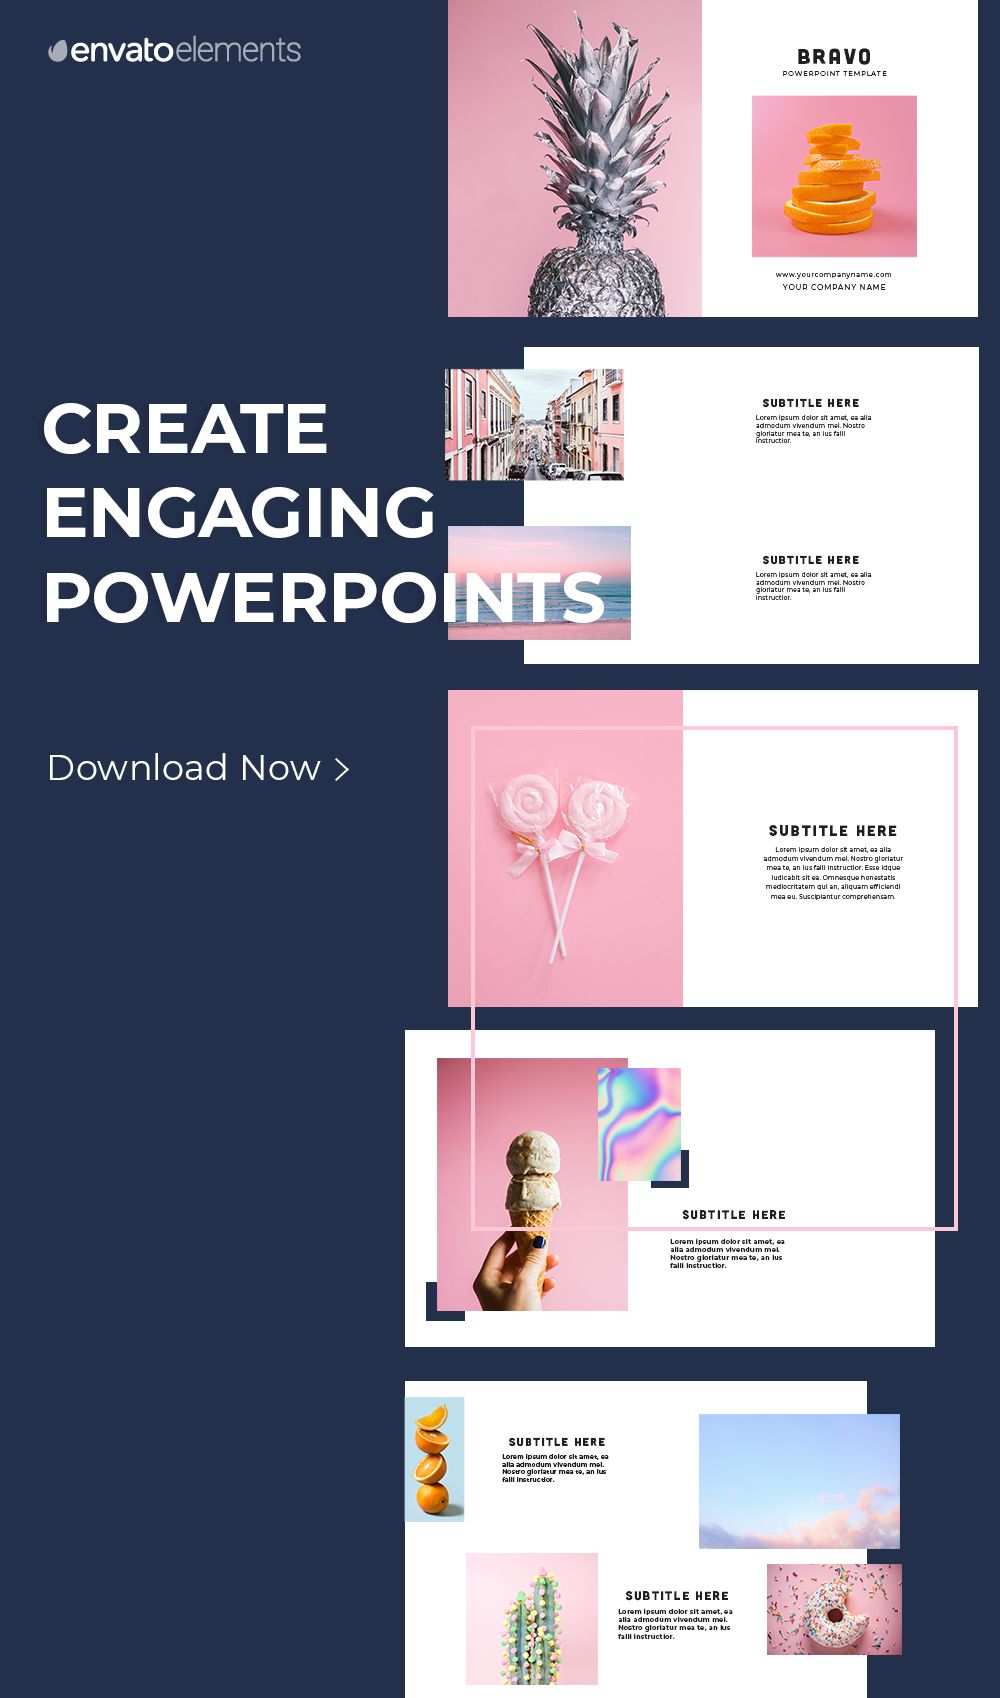 Unlimited Downloads Of 2019 S Best Powerpoint Templates